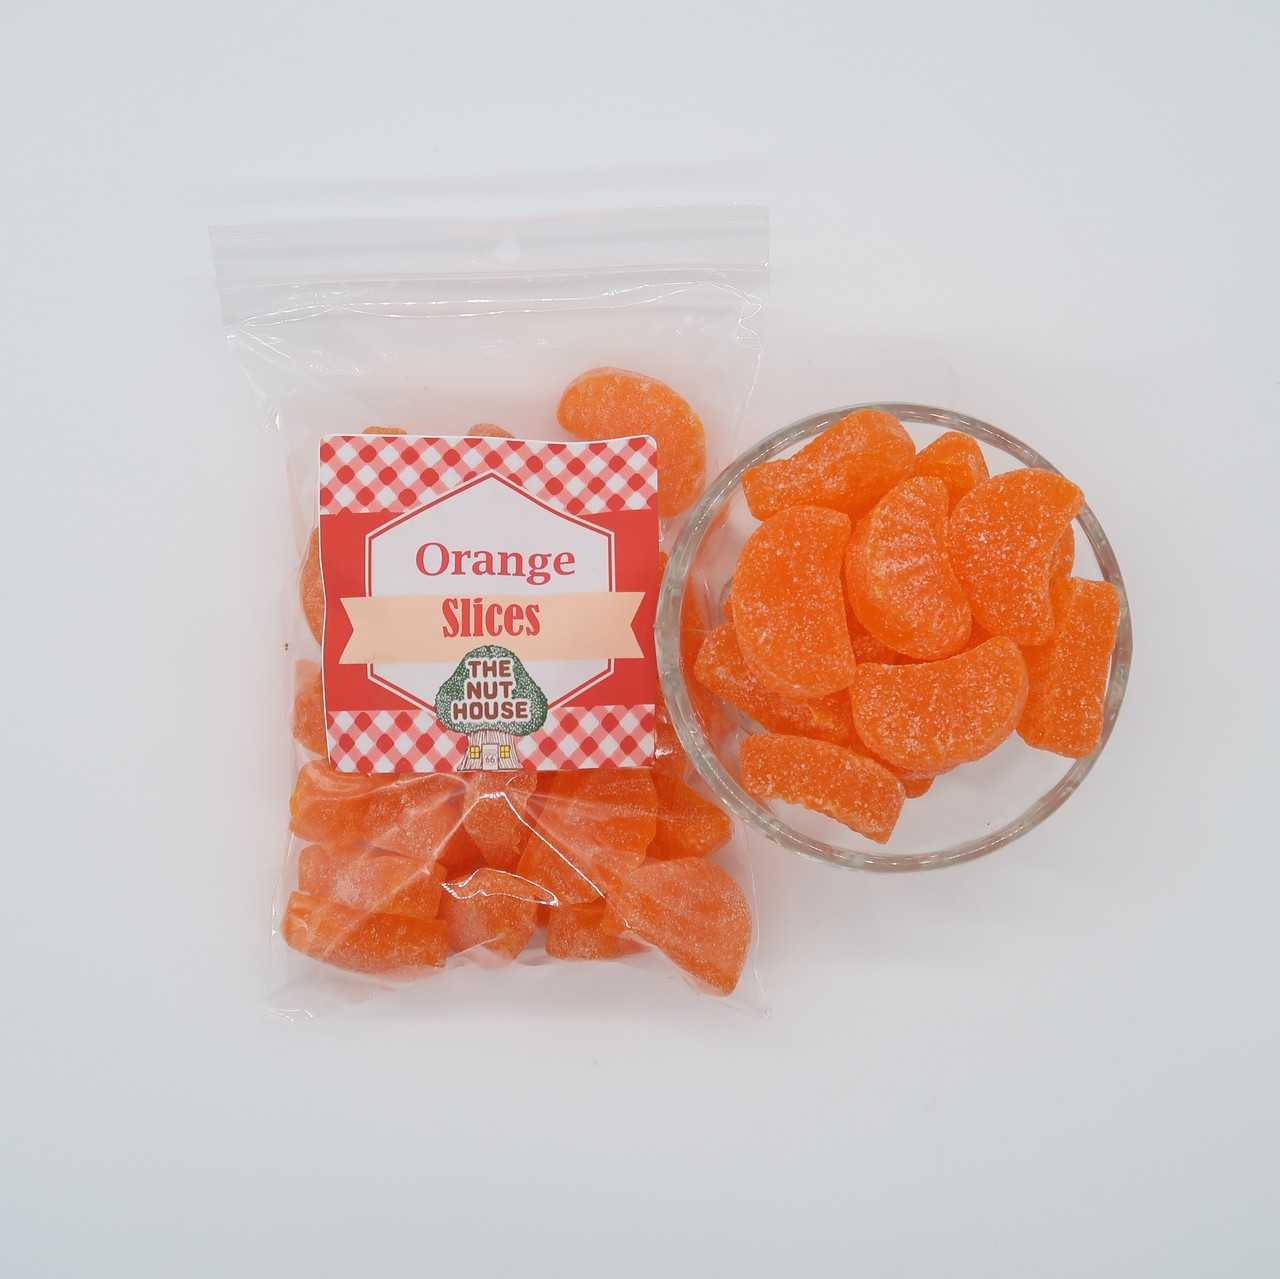 Orange Slices Oz Classic Candy From The Nut House